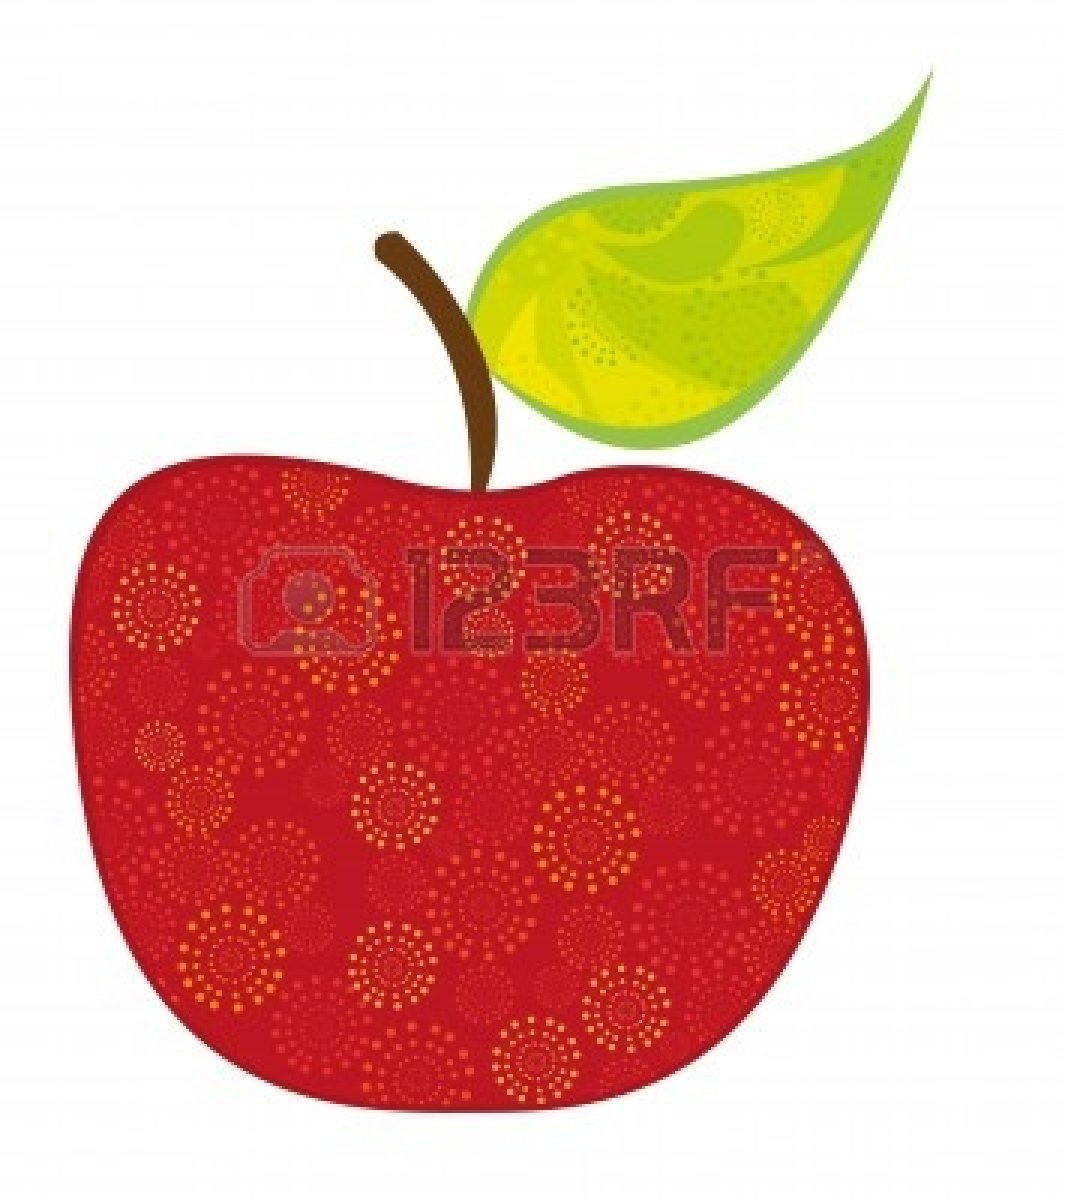 Cute Apple Clip Art 10755572 Cute Apple With Ornaments Isolated Over